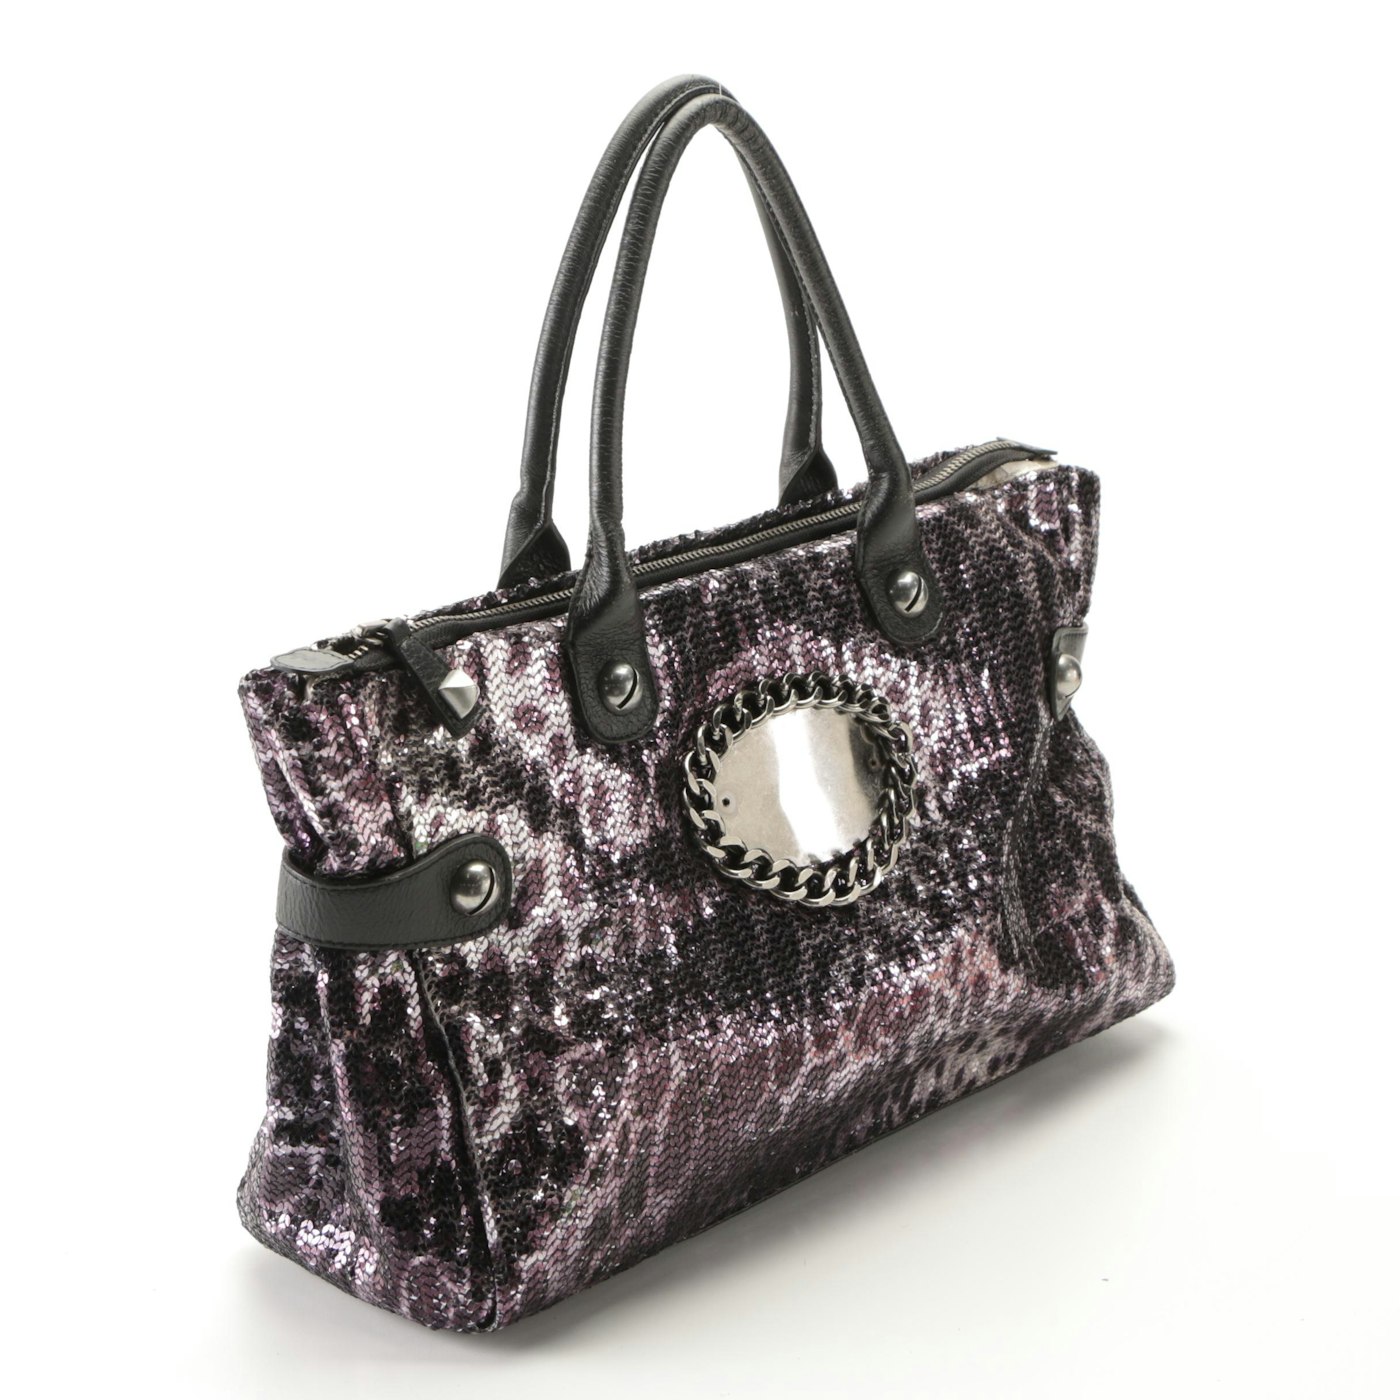 Betsey Johnson Tote Bag in Sequined Animal Print | EBTH